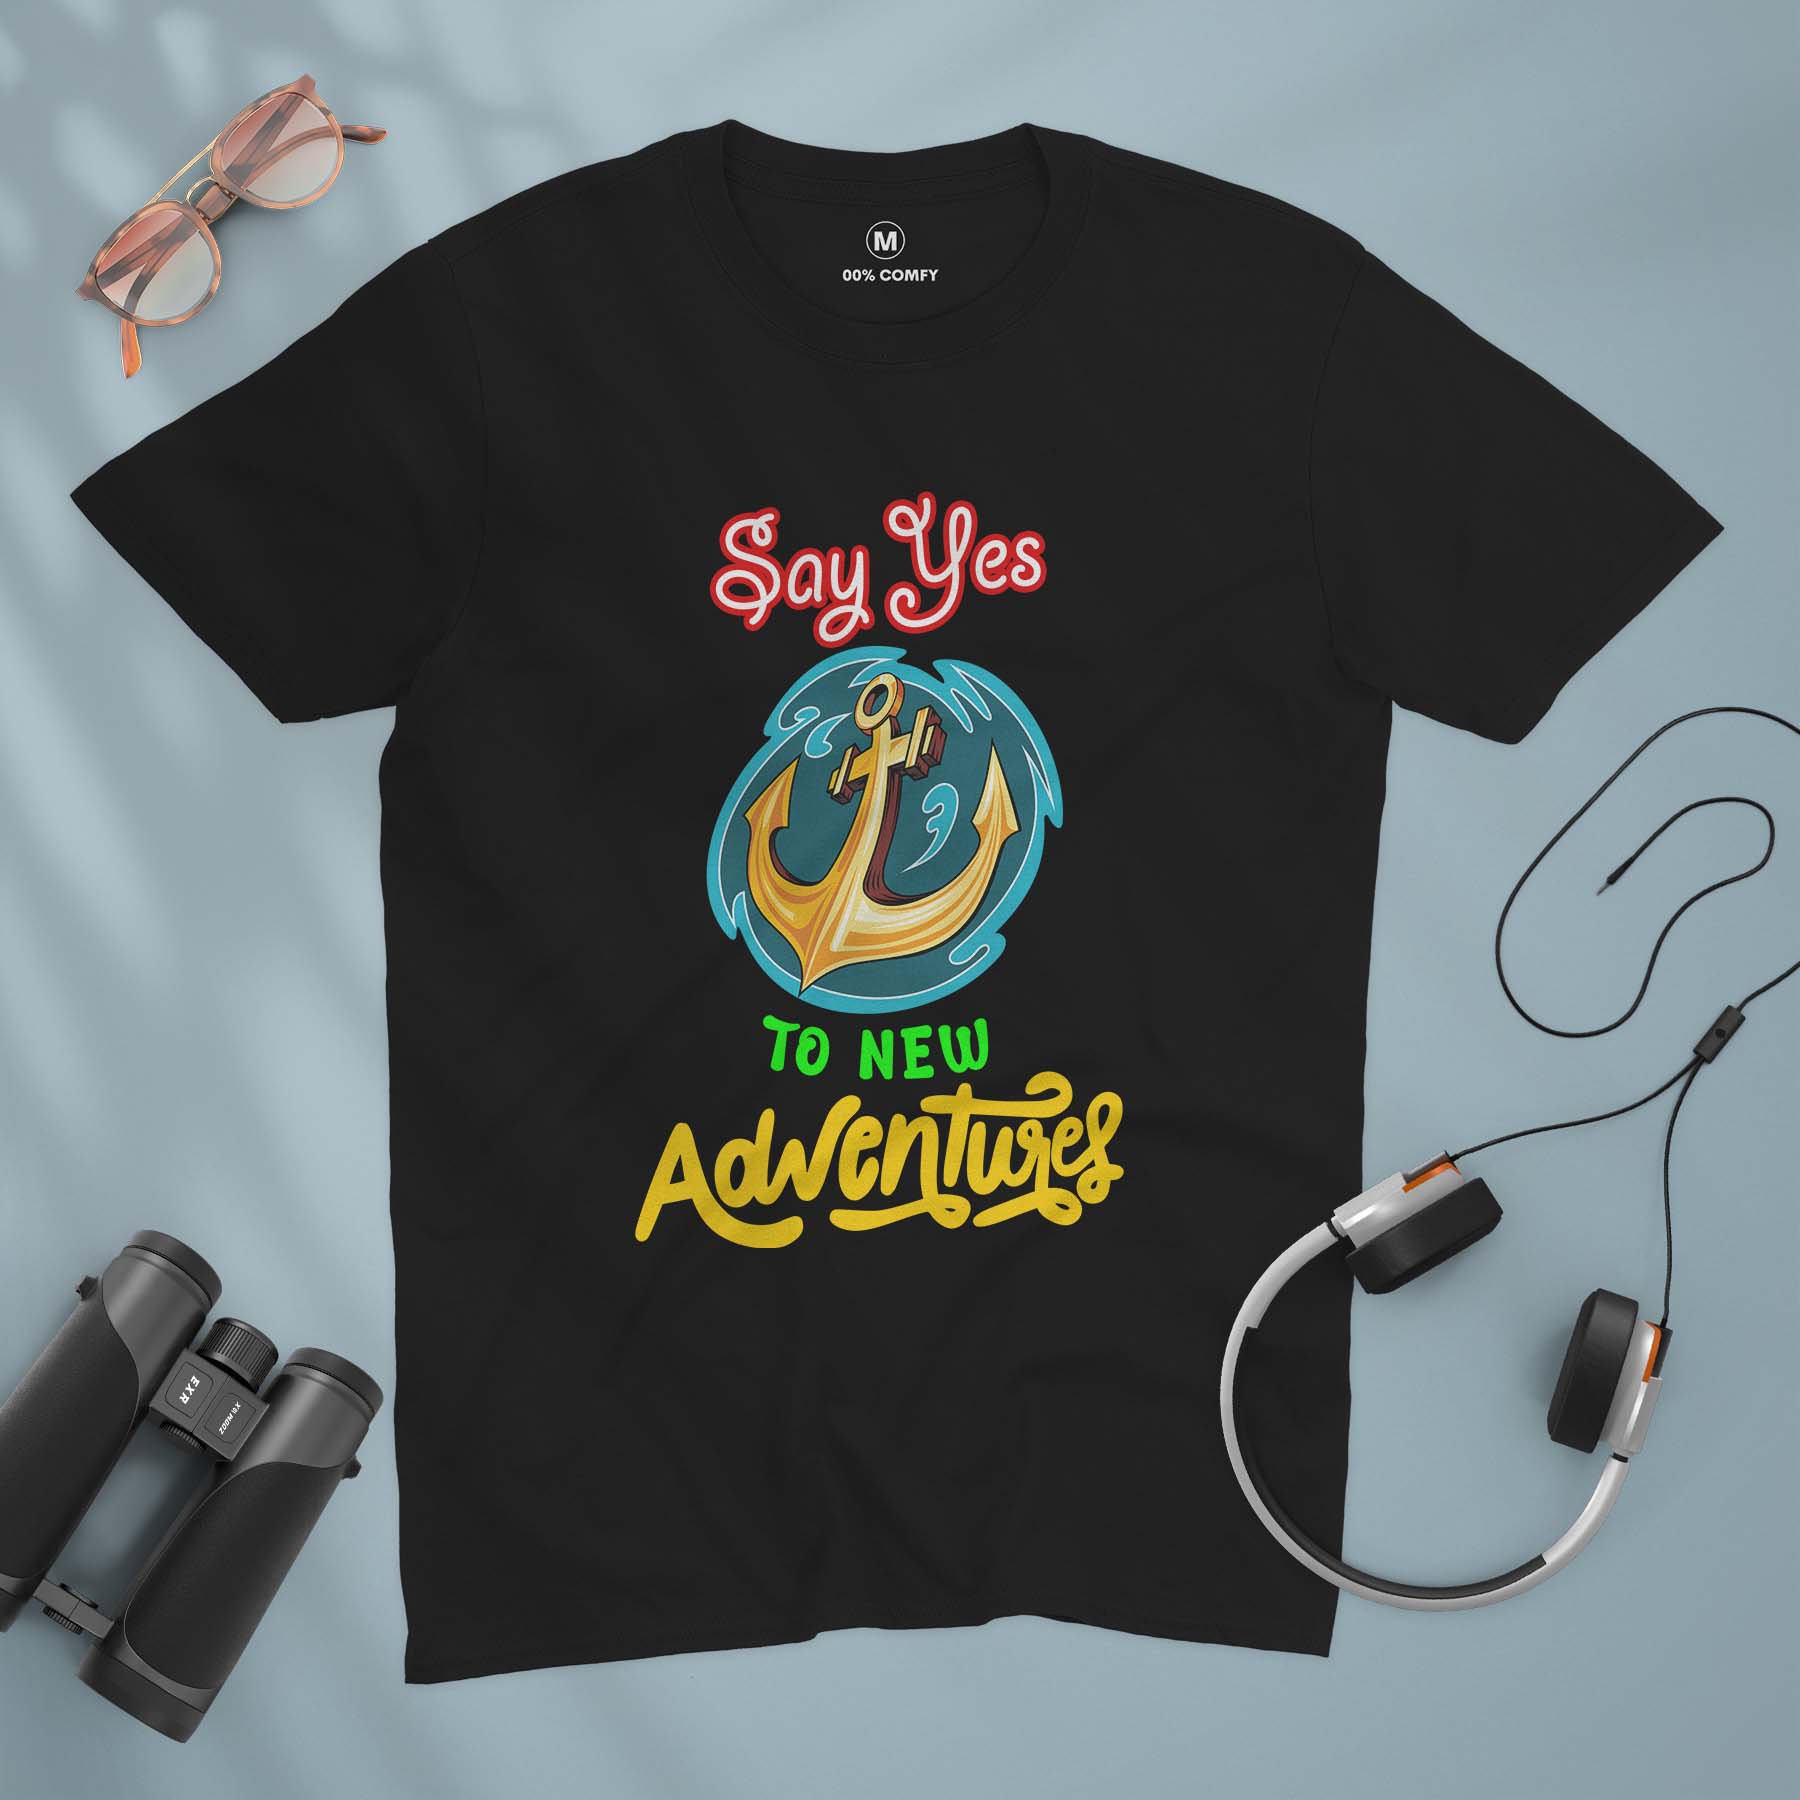 Say Yes To New Adventures - Unisex T-shirt